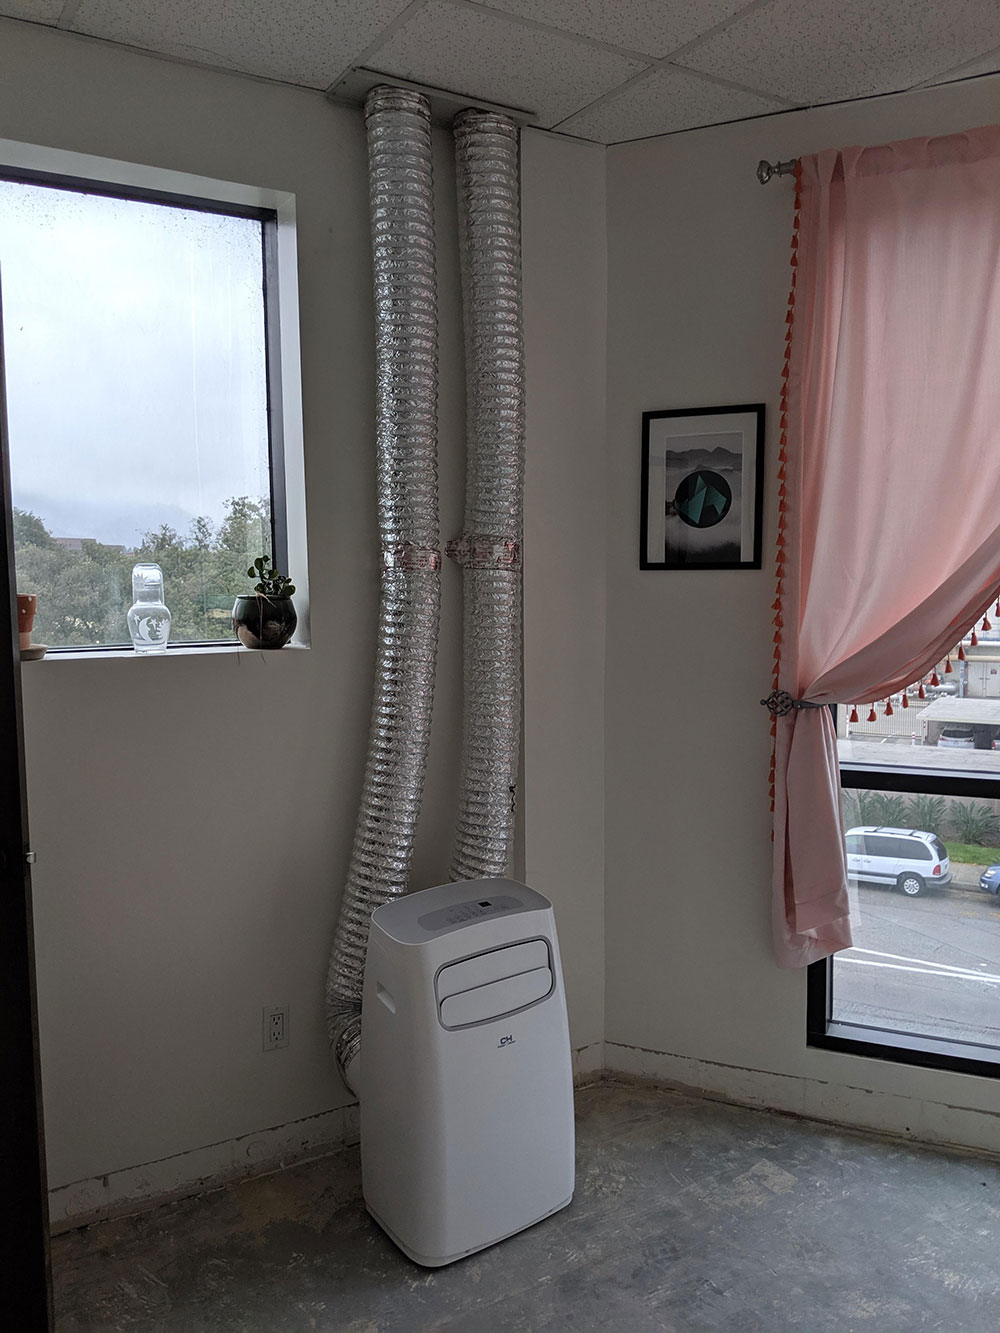 Vent-a-portable-AC-unit-through-a-drop-ceiling How to vent a portable air conditioner without a window